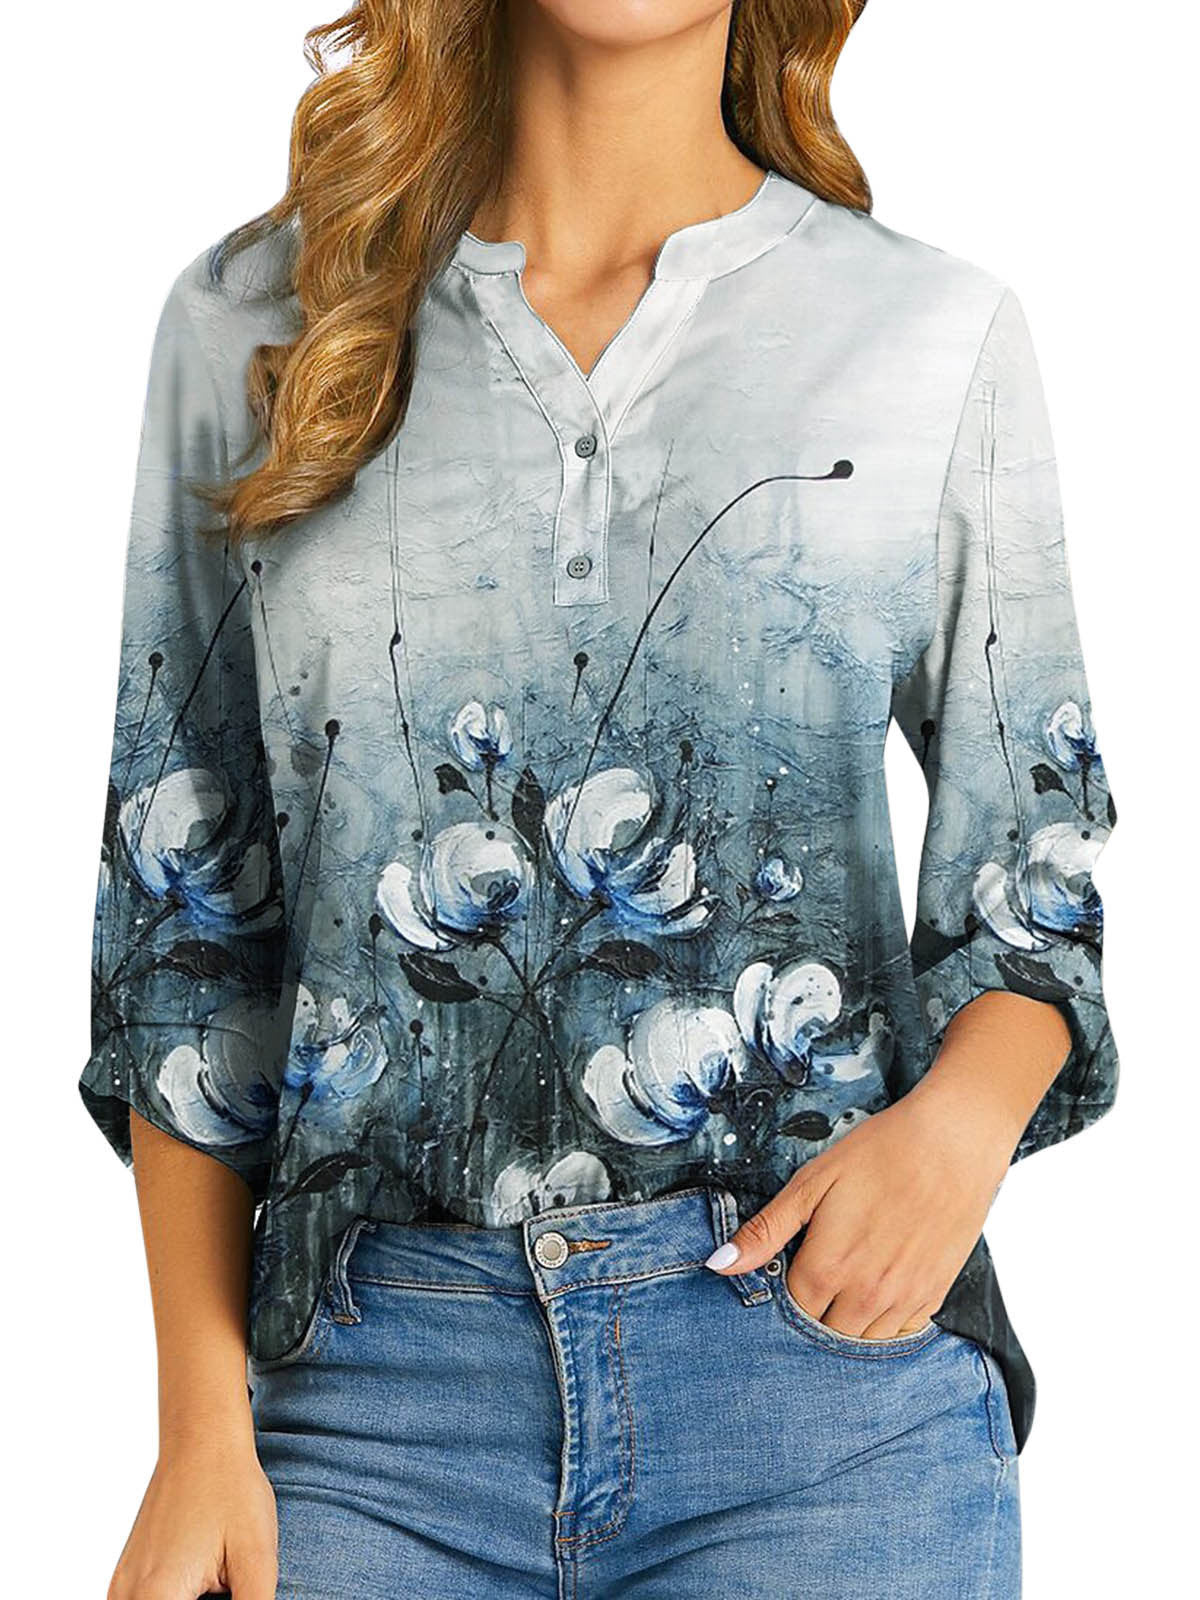 Women's Long Sleeve V-Neck Solid Floral Printed Tops